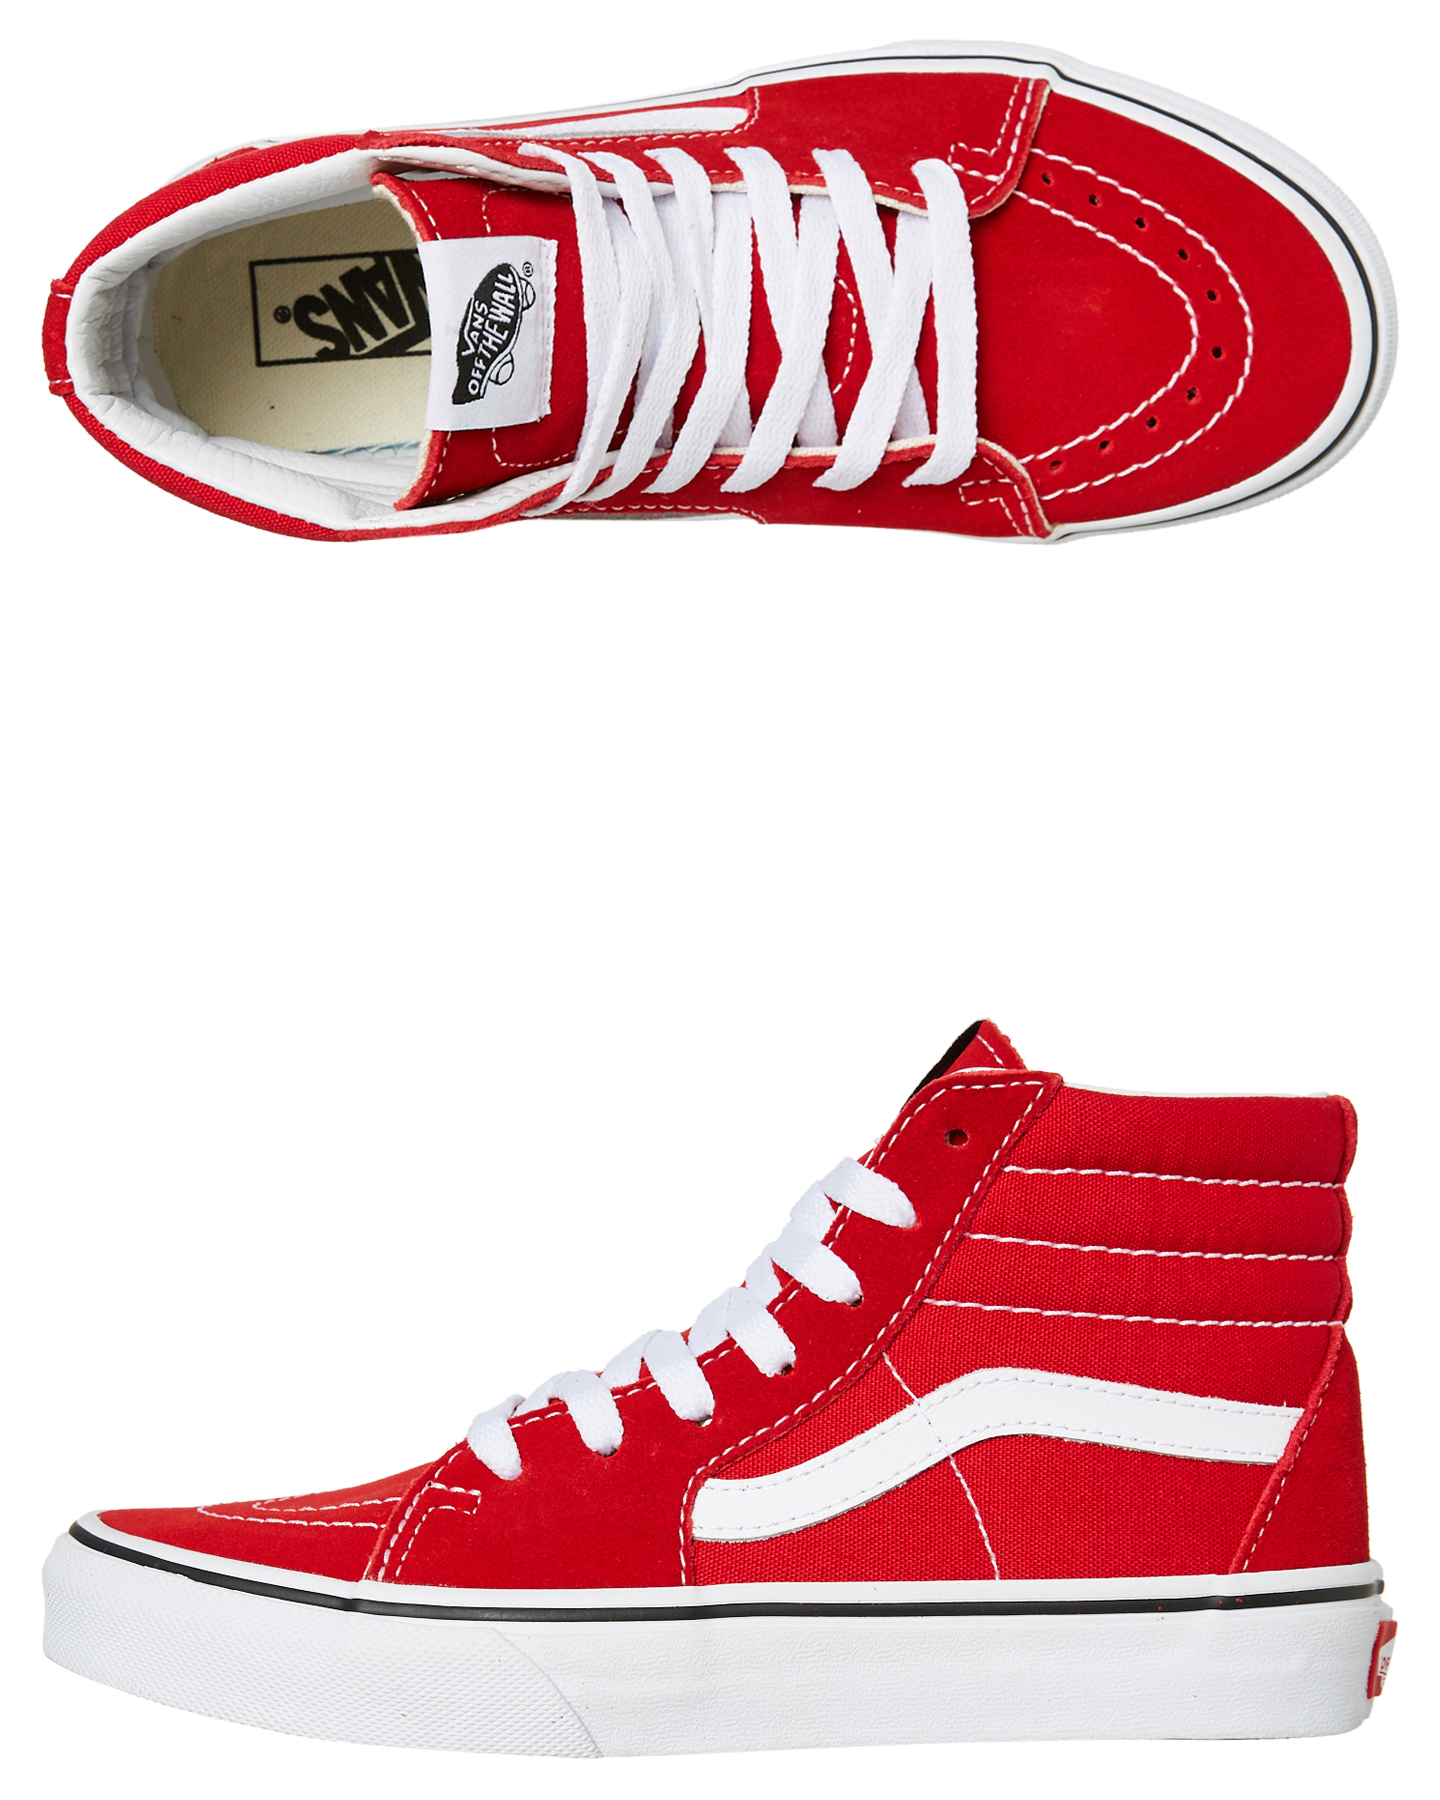 all red vans youth